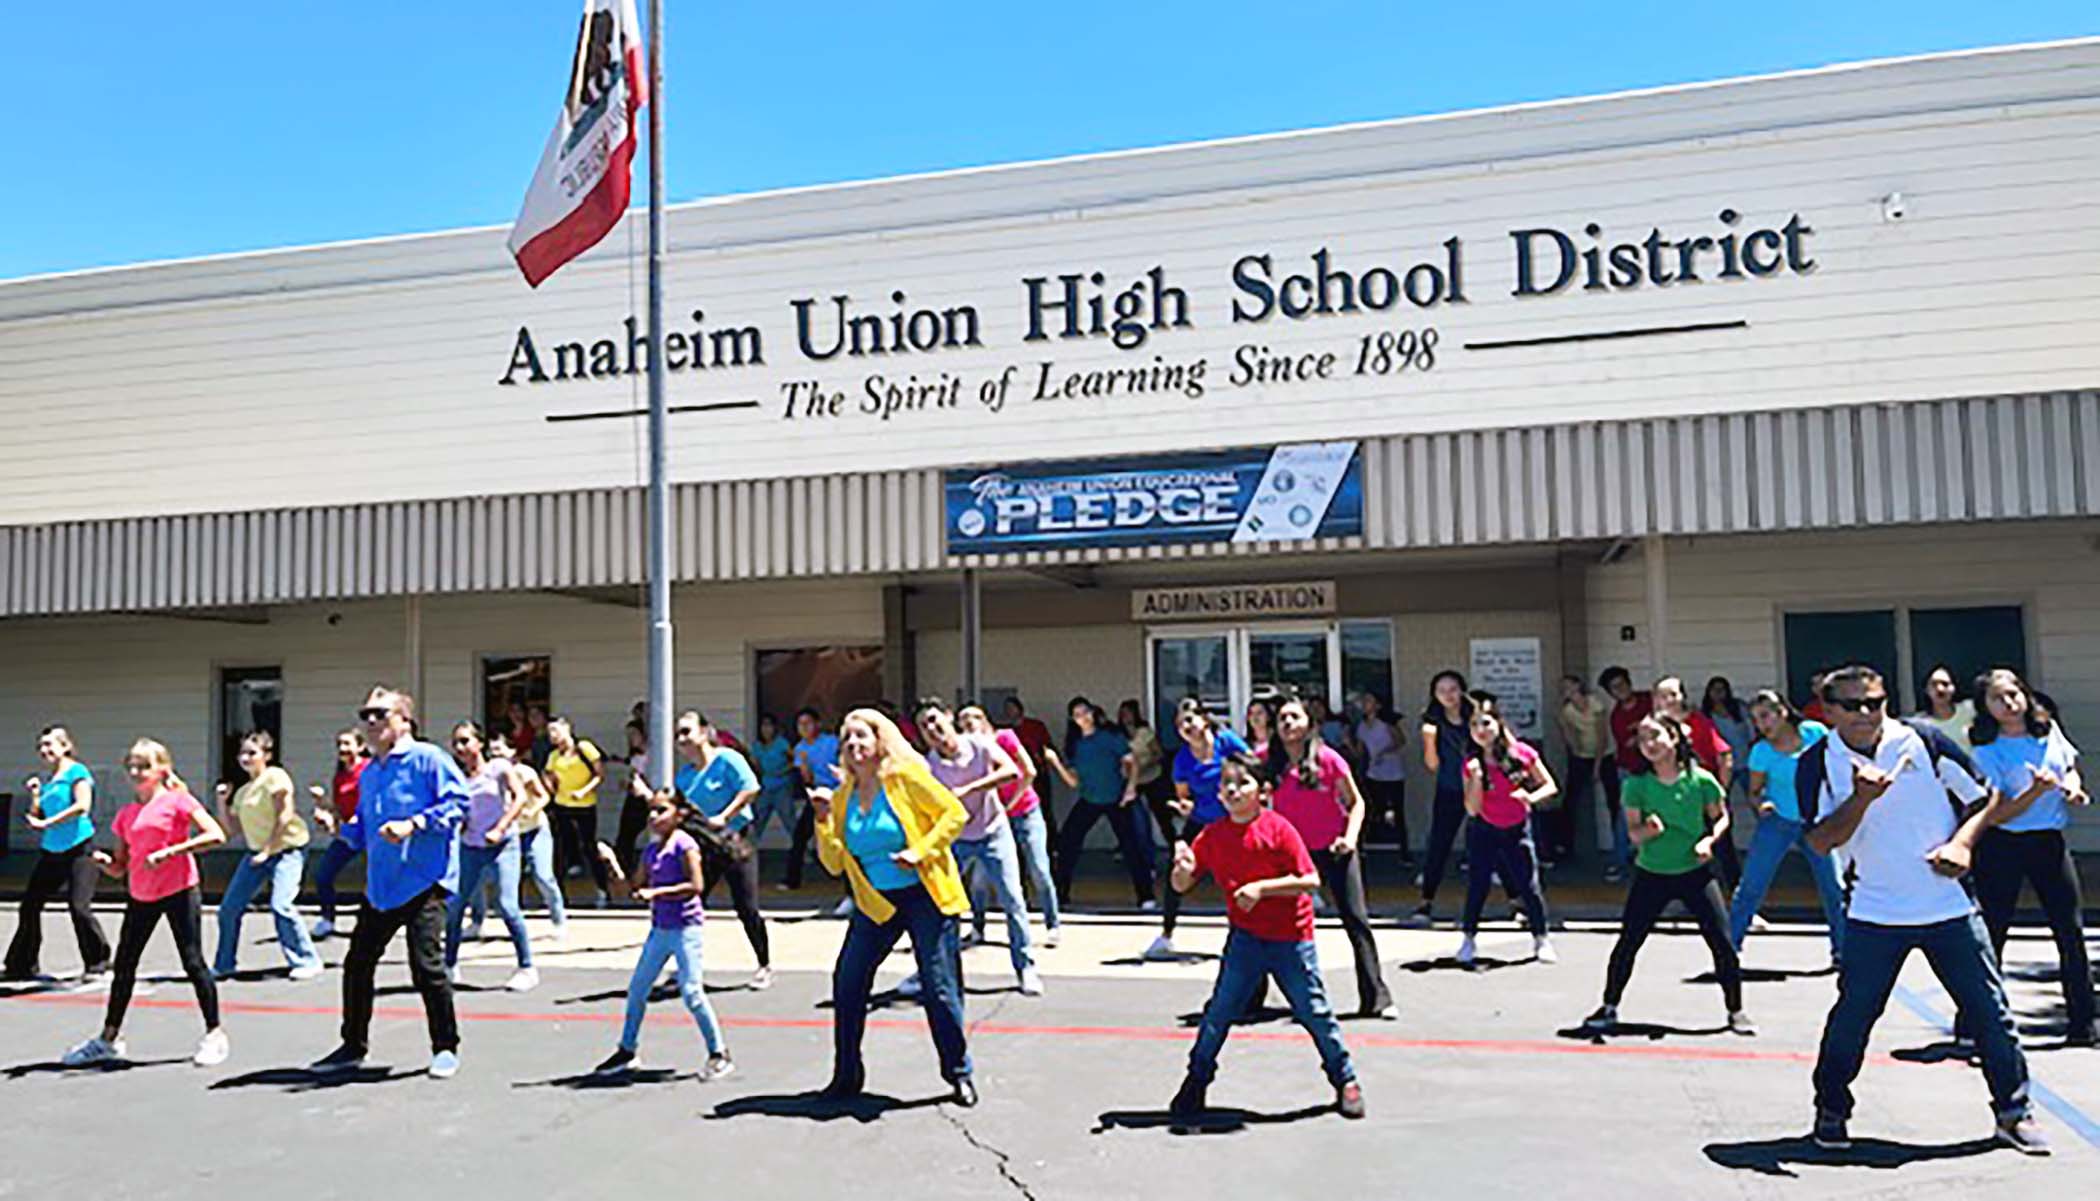 A group of people dances outside of the Anaheim Union High School District building.